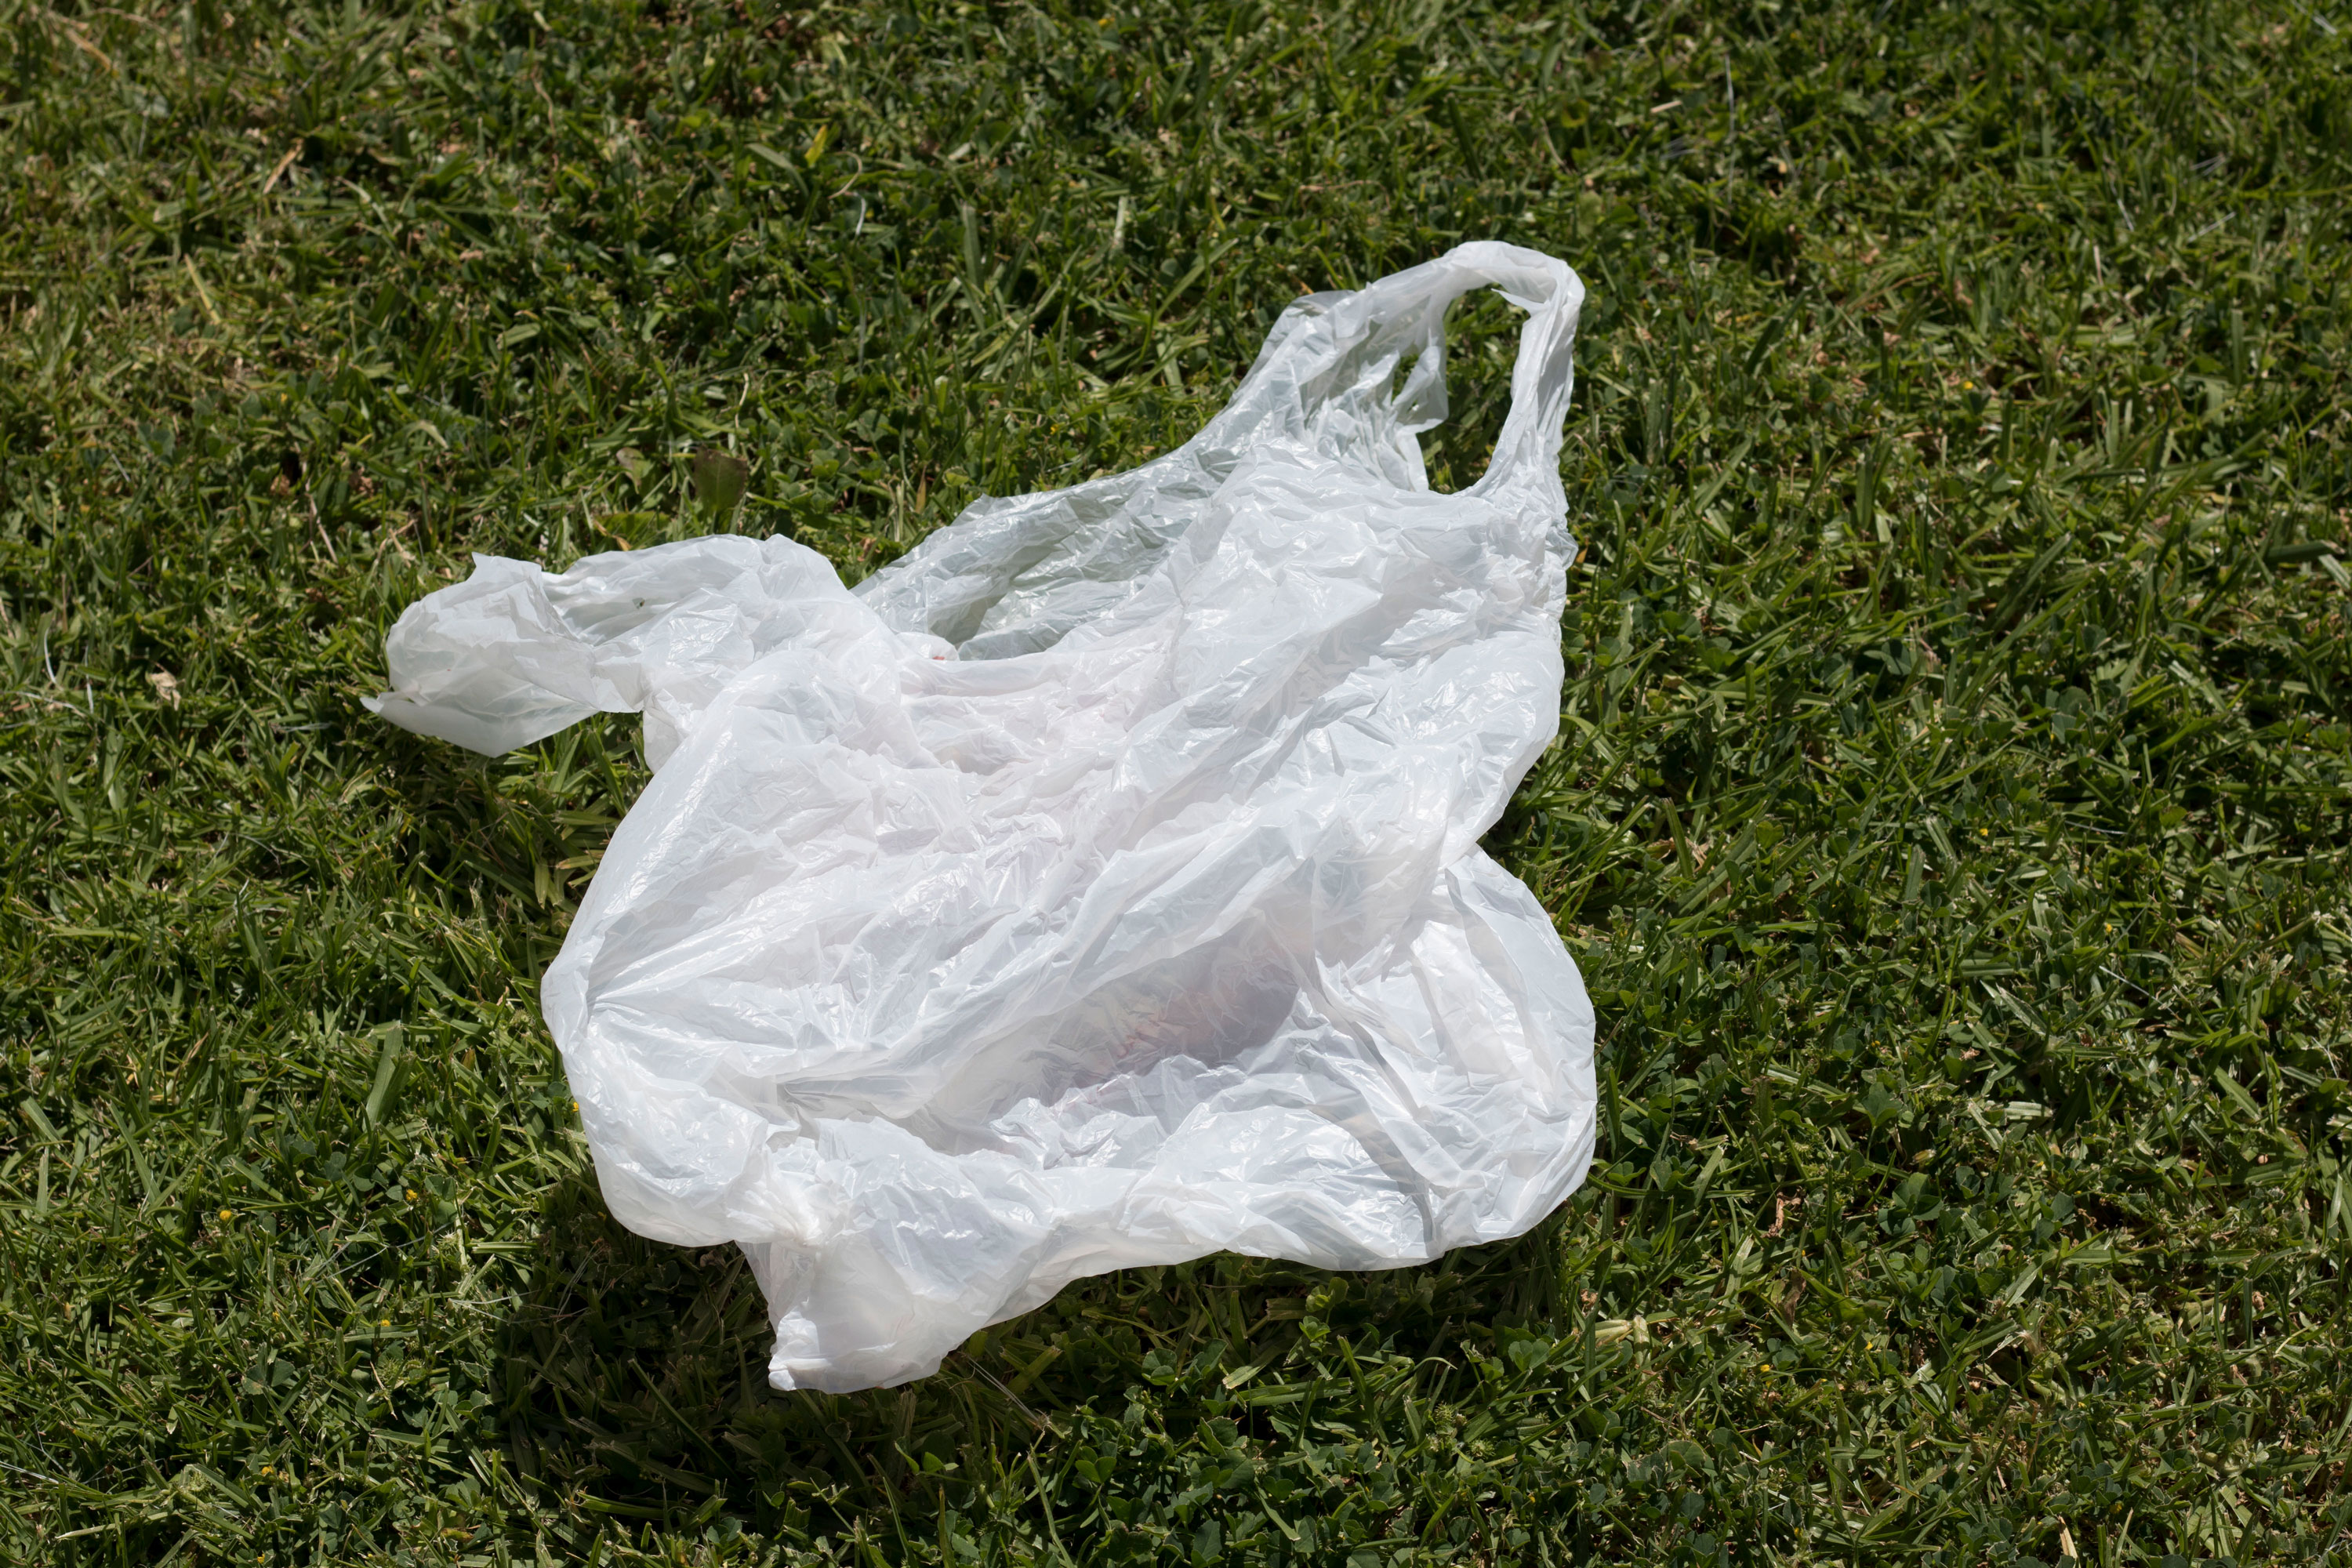 10 Cities and Countries Confronting Plastic Bag Pollution Head-On